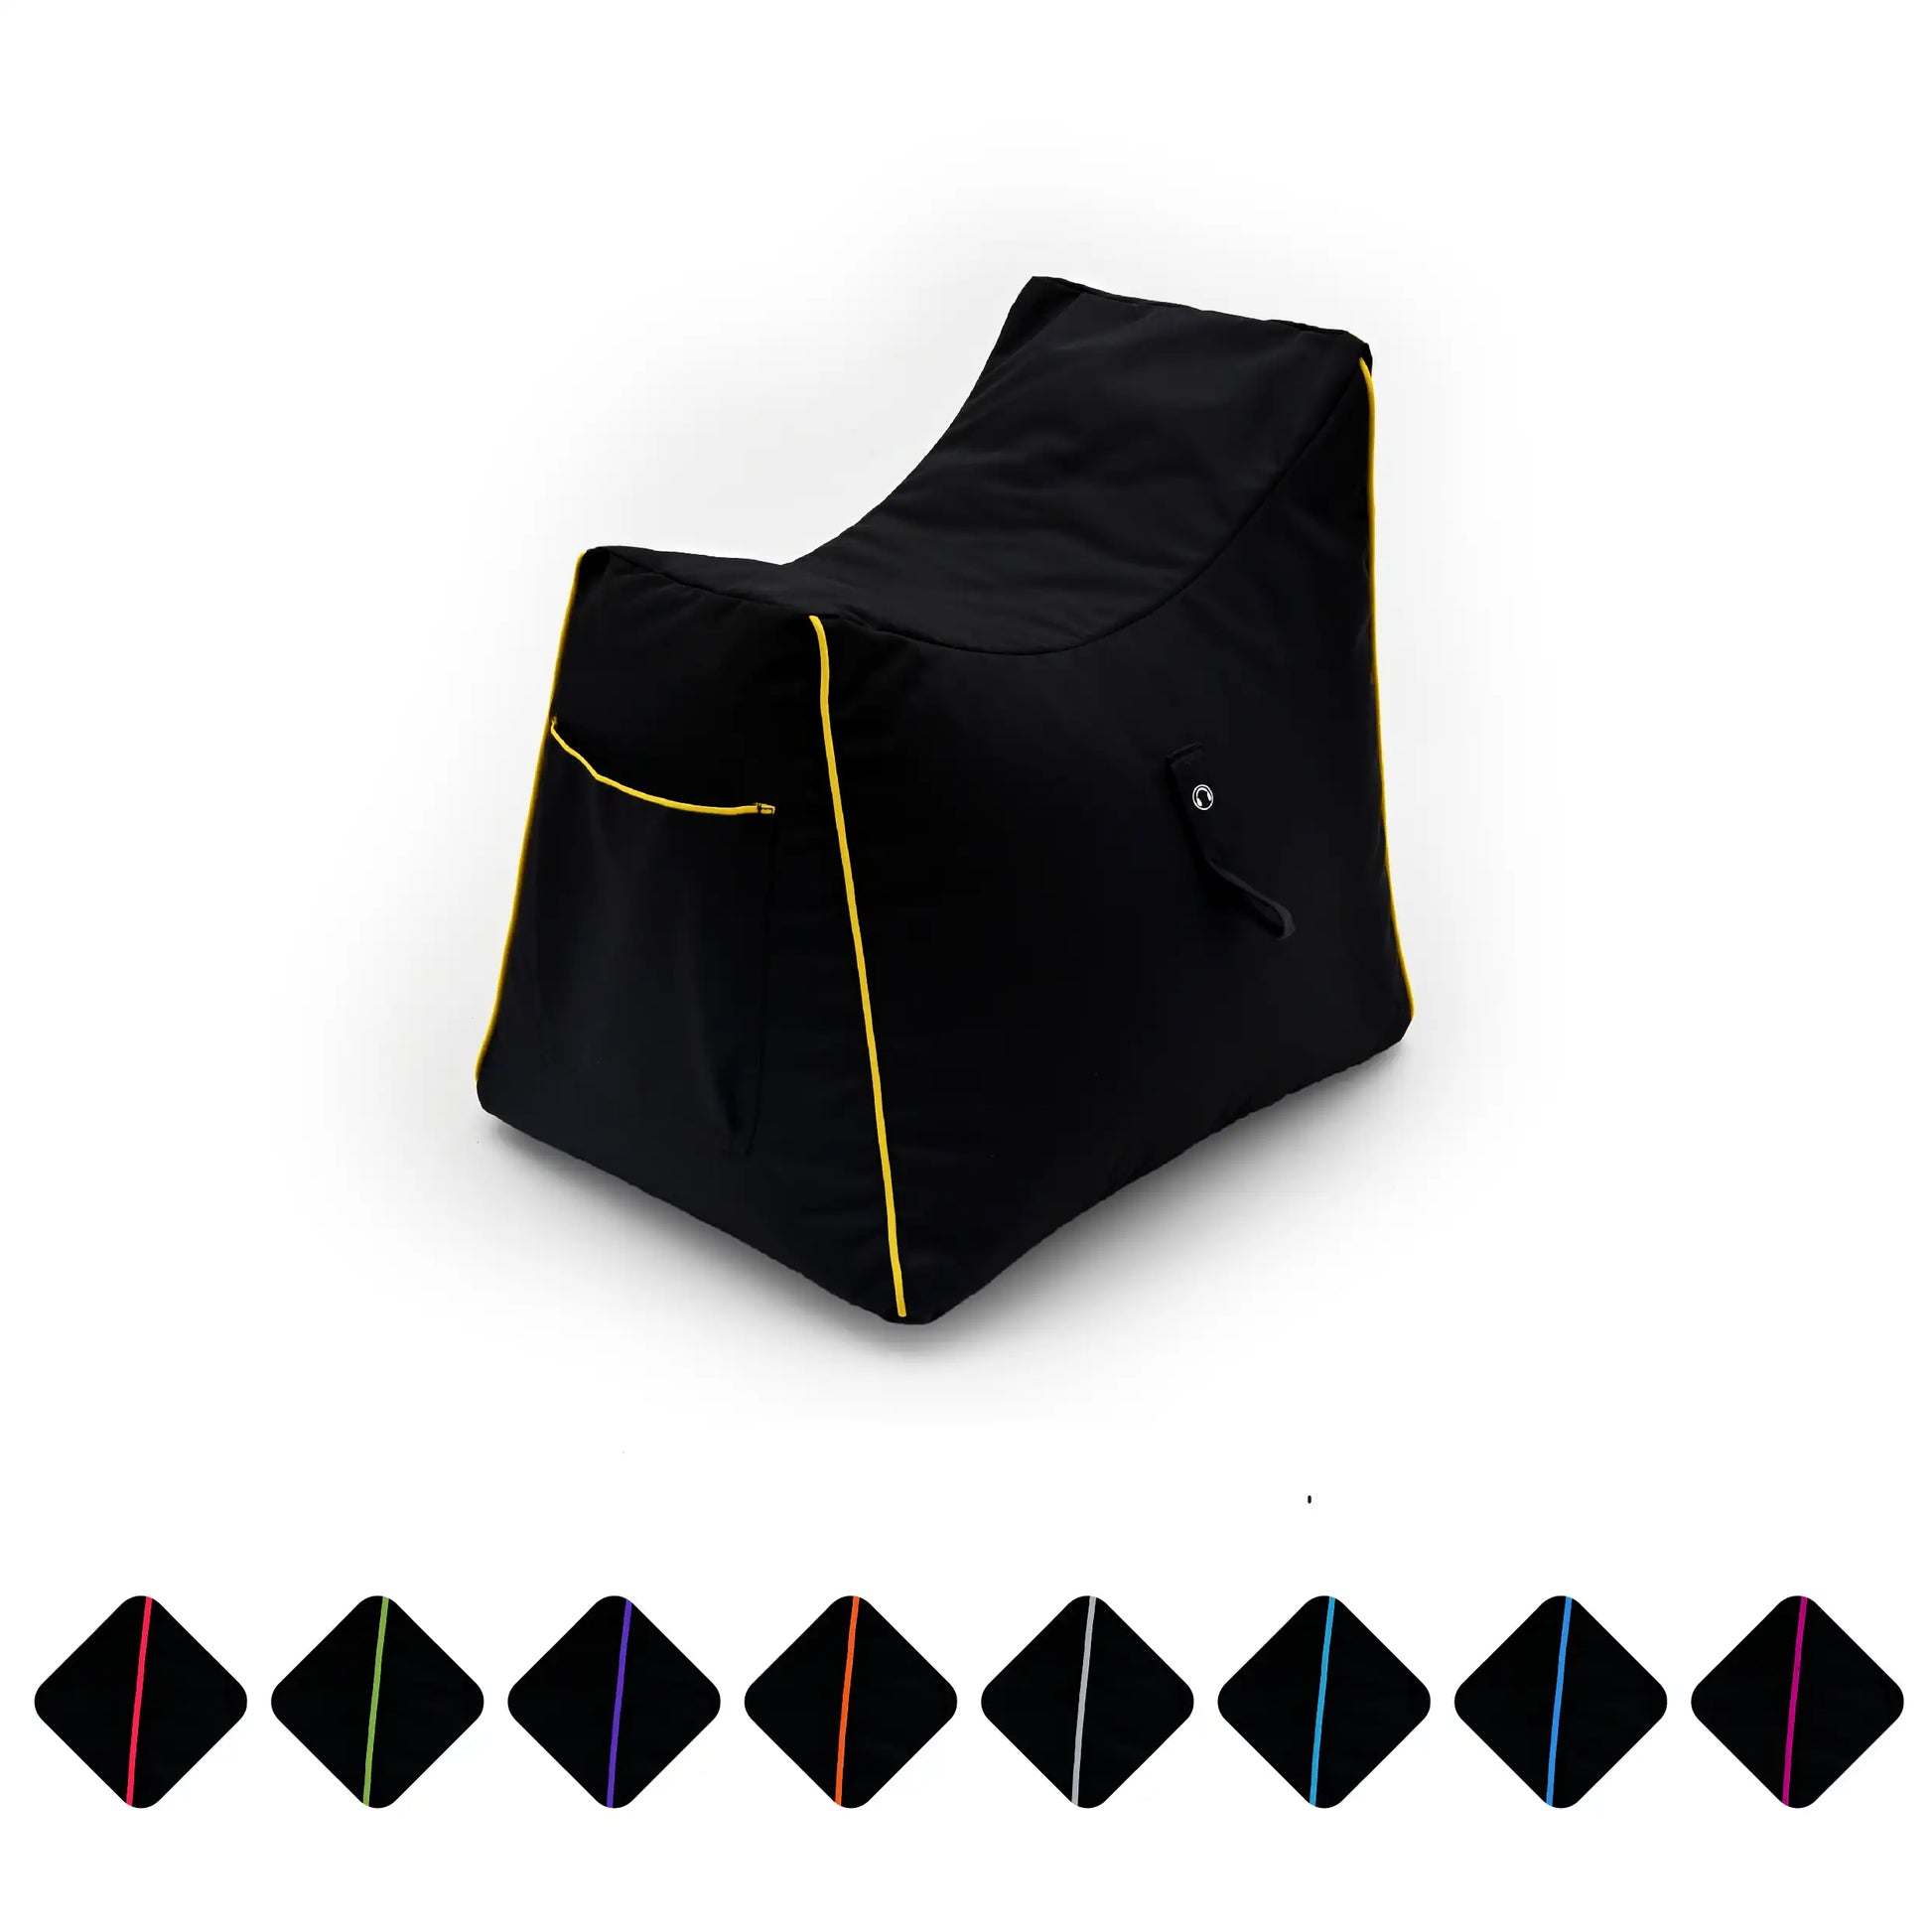 A black bag cover with a yellow accent stripe.